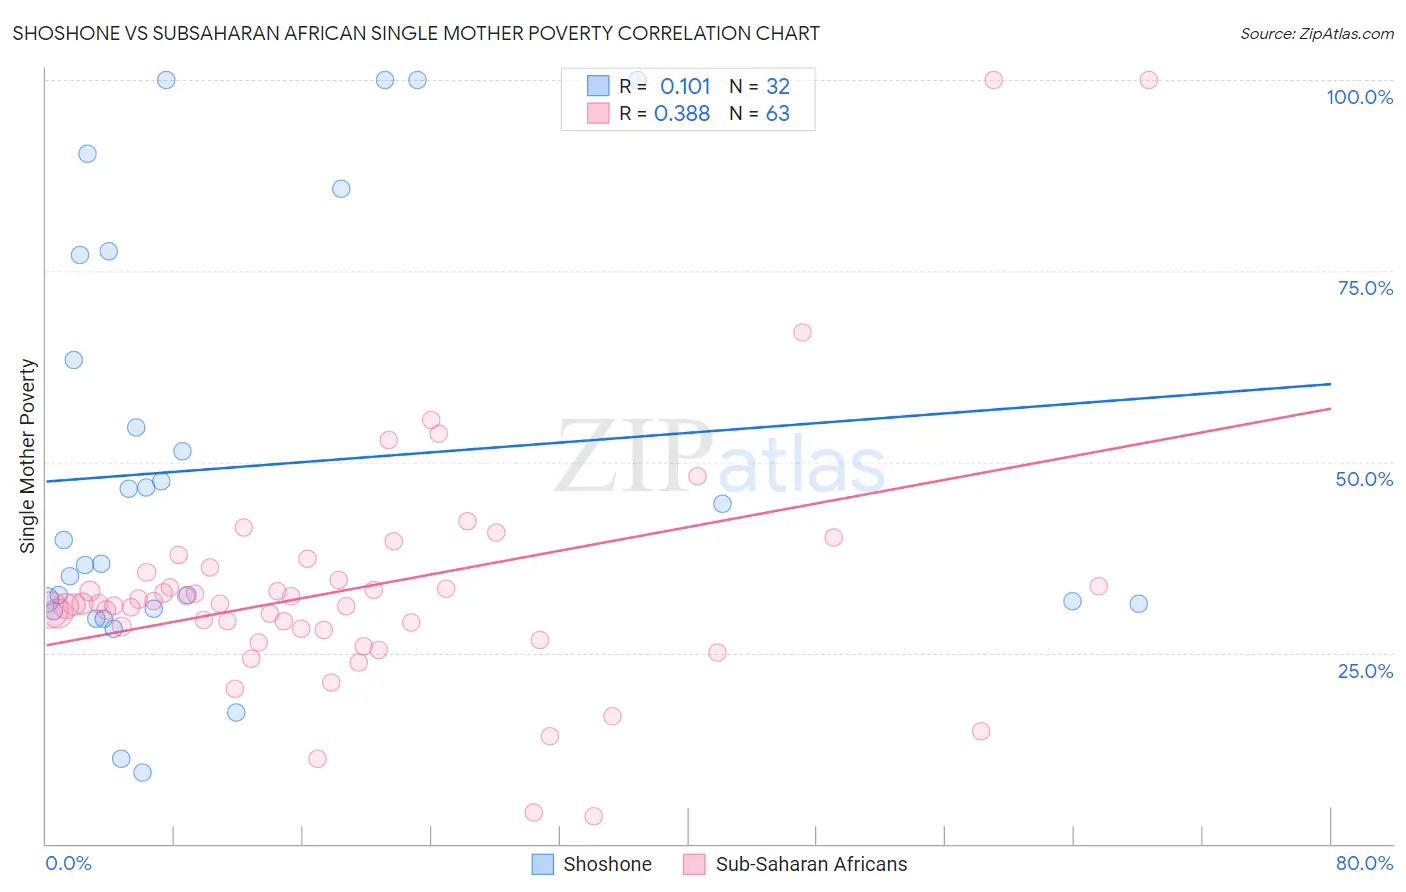 Shoshone vs Subsaharan African Single Mother Poverty